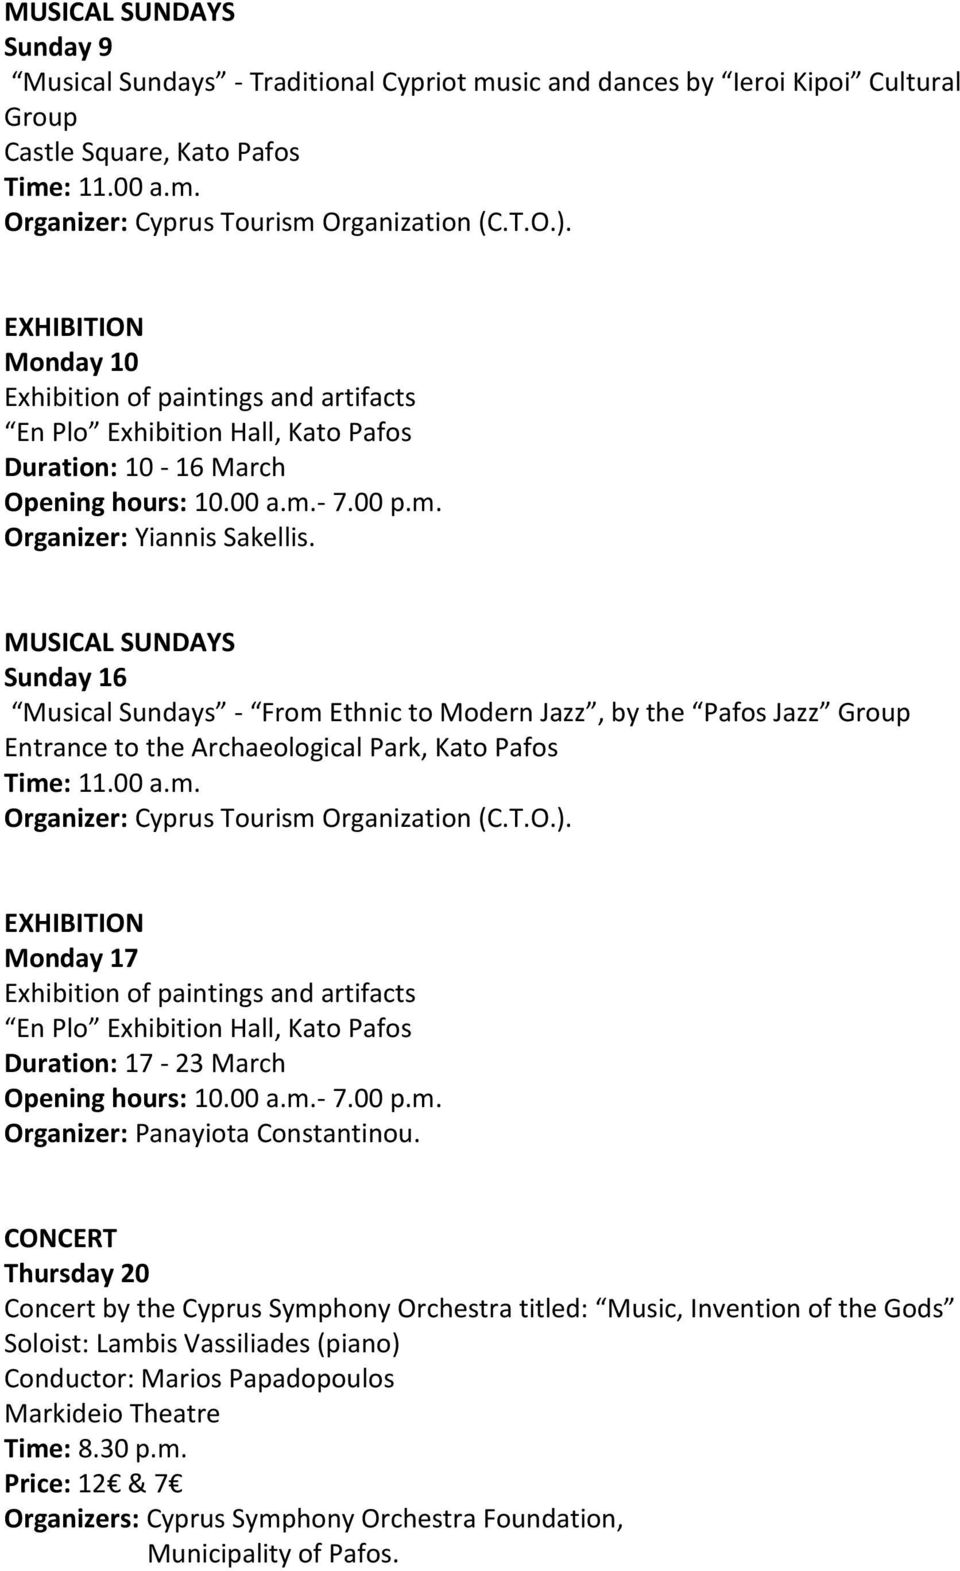 Sunday 16 Musical Sundays - From Ethnic to Modern Jazz, by the Pafos Jazz Group Entrance to the Archaeological Park, Kato Pafos EXHIBITION Monday 17 Exhibition of paintings and artifacts En Plo